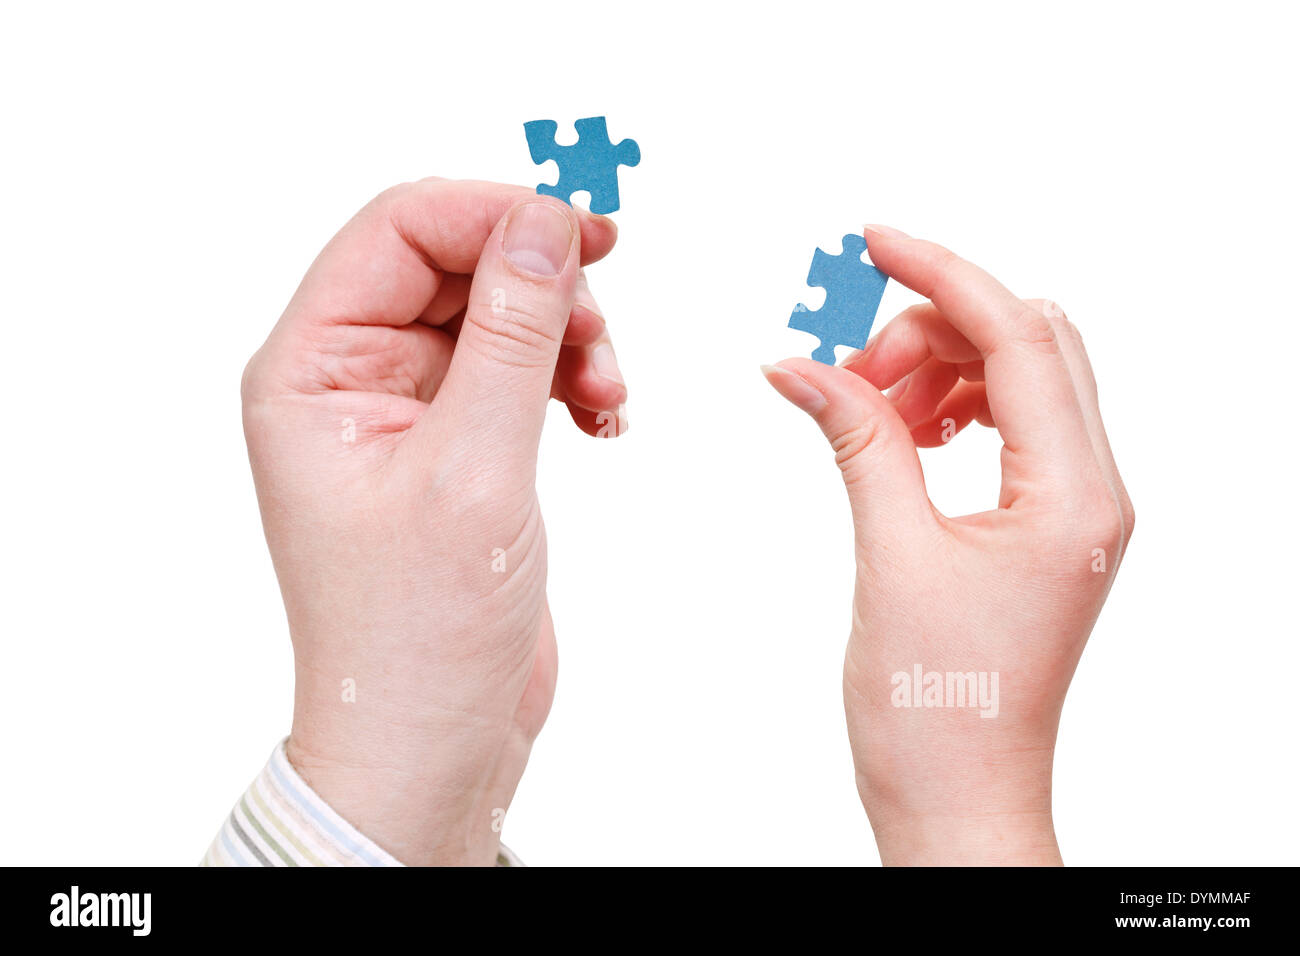 Hold puzzle Cut Out Stock Images & Pictures - Page 2 - Alamy